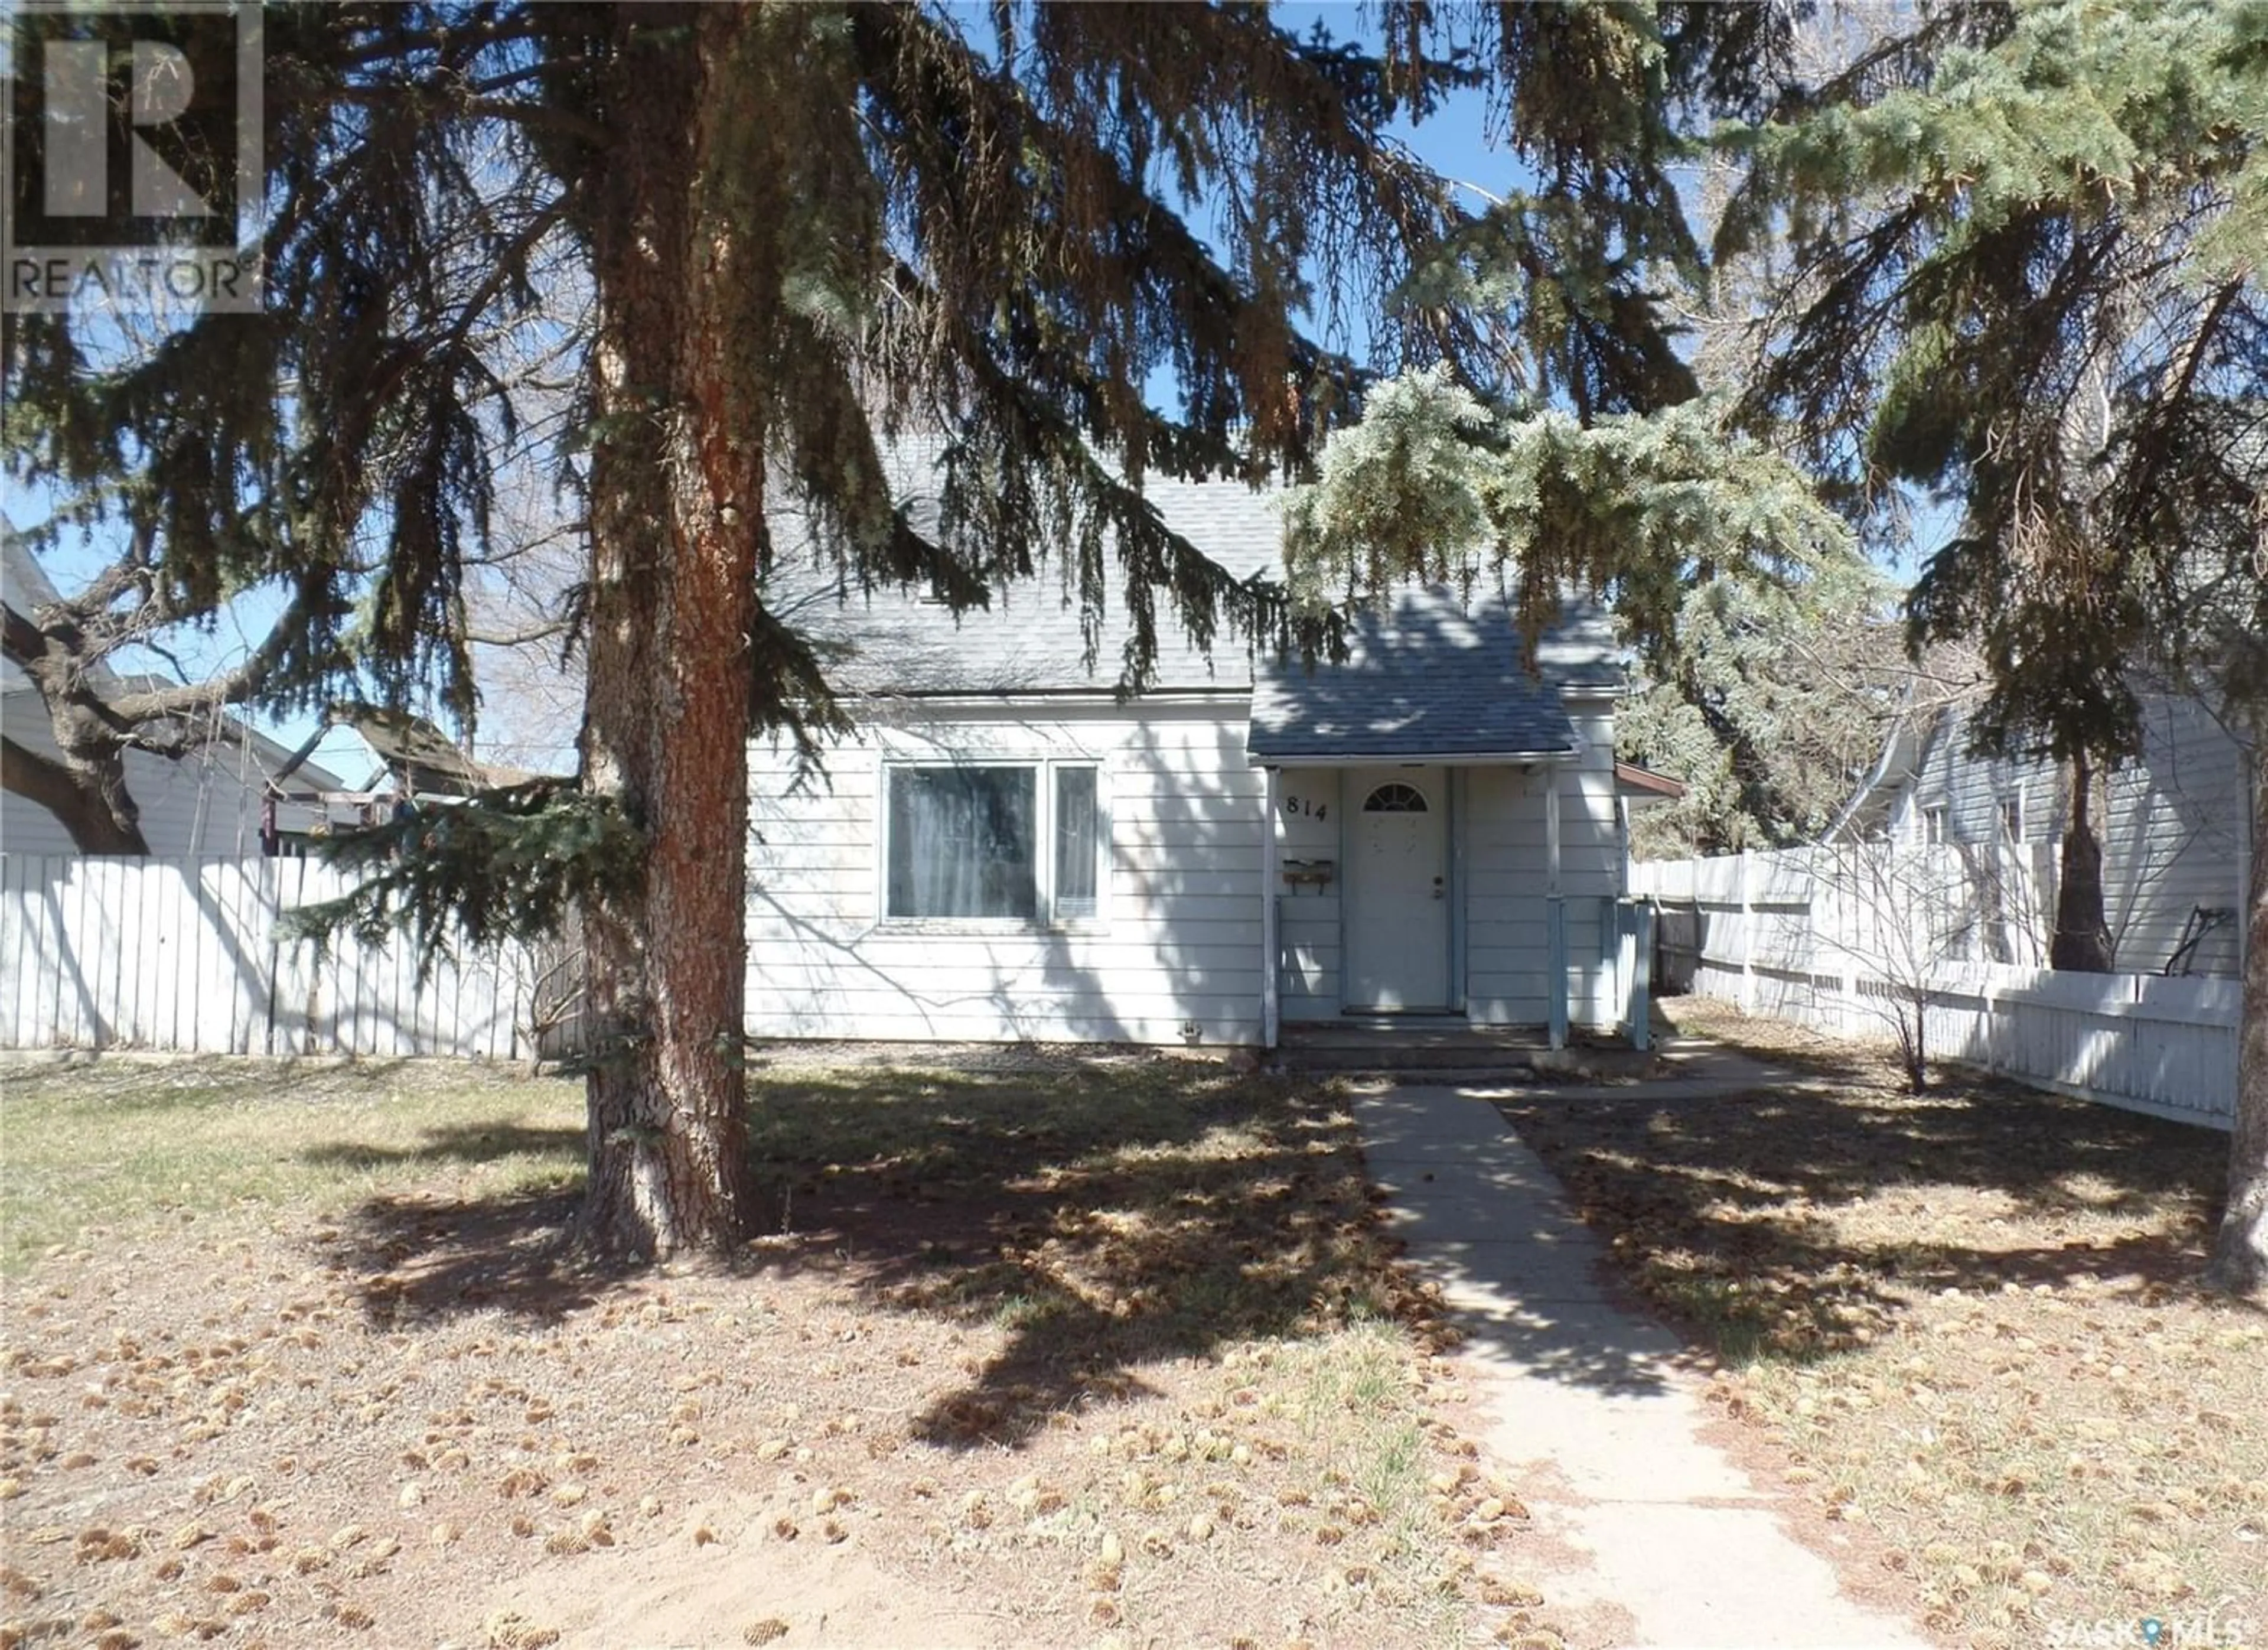 Outside view for 814 Athabasca STREET E, Moose Jaw Saskatchewan S6H0M7